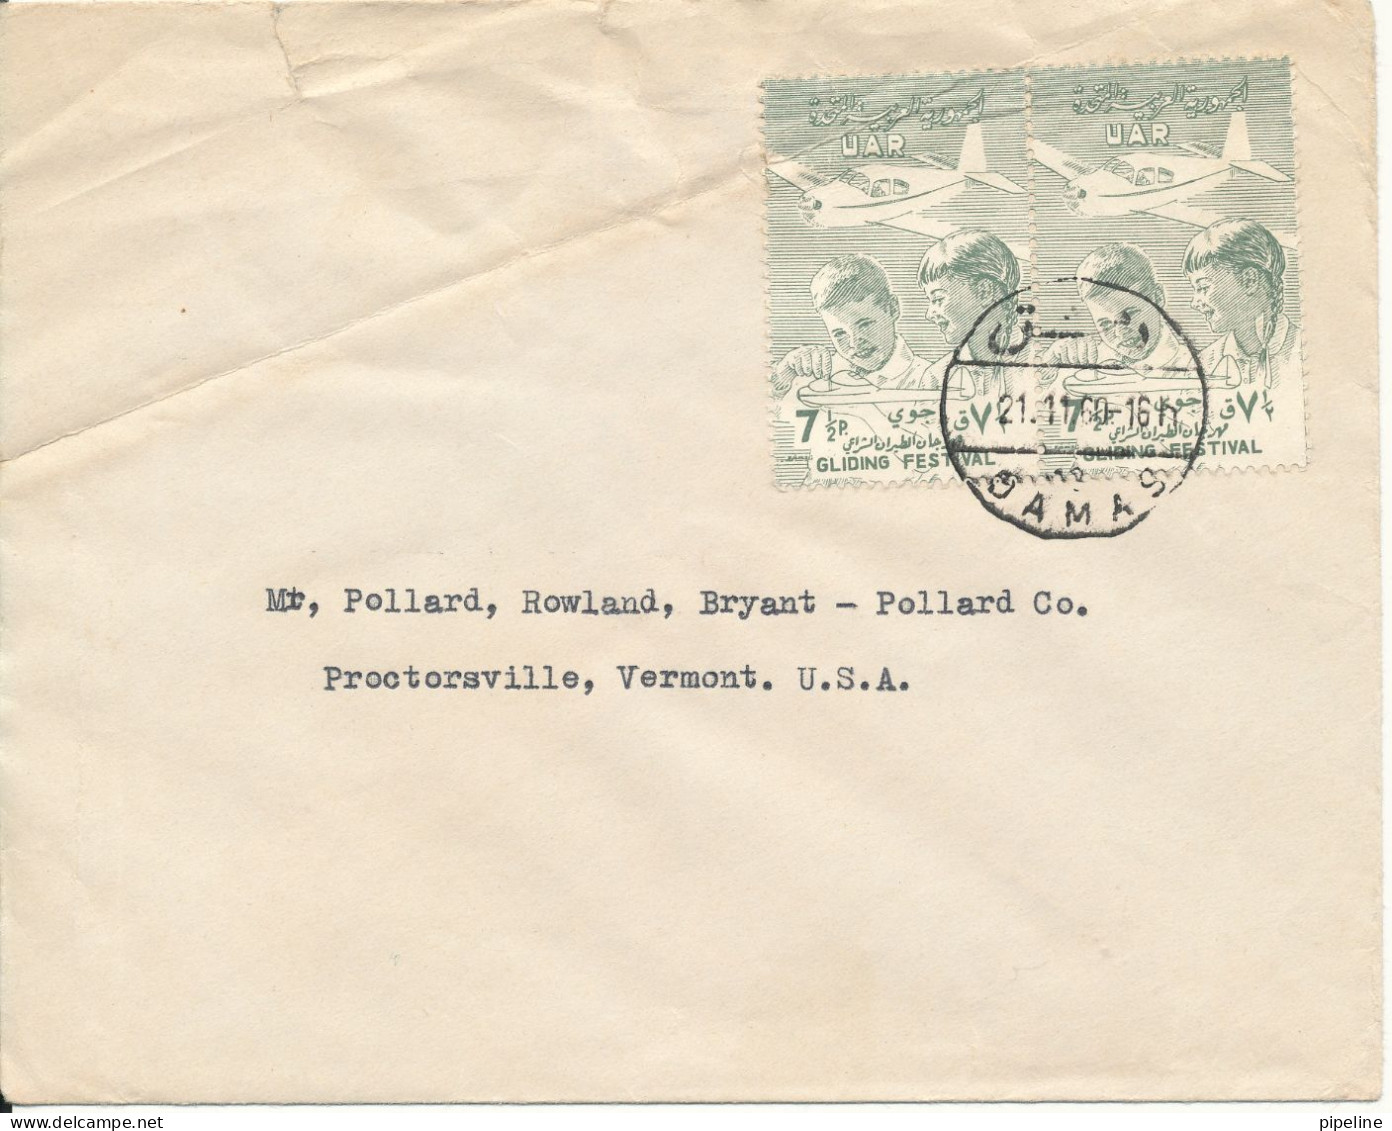 Syria Cover Sent To USA 21-11-1960 The Cover Is Bended And There Is A Tear At The Top Of The Cover - Syrie